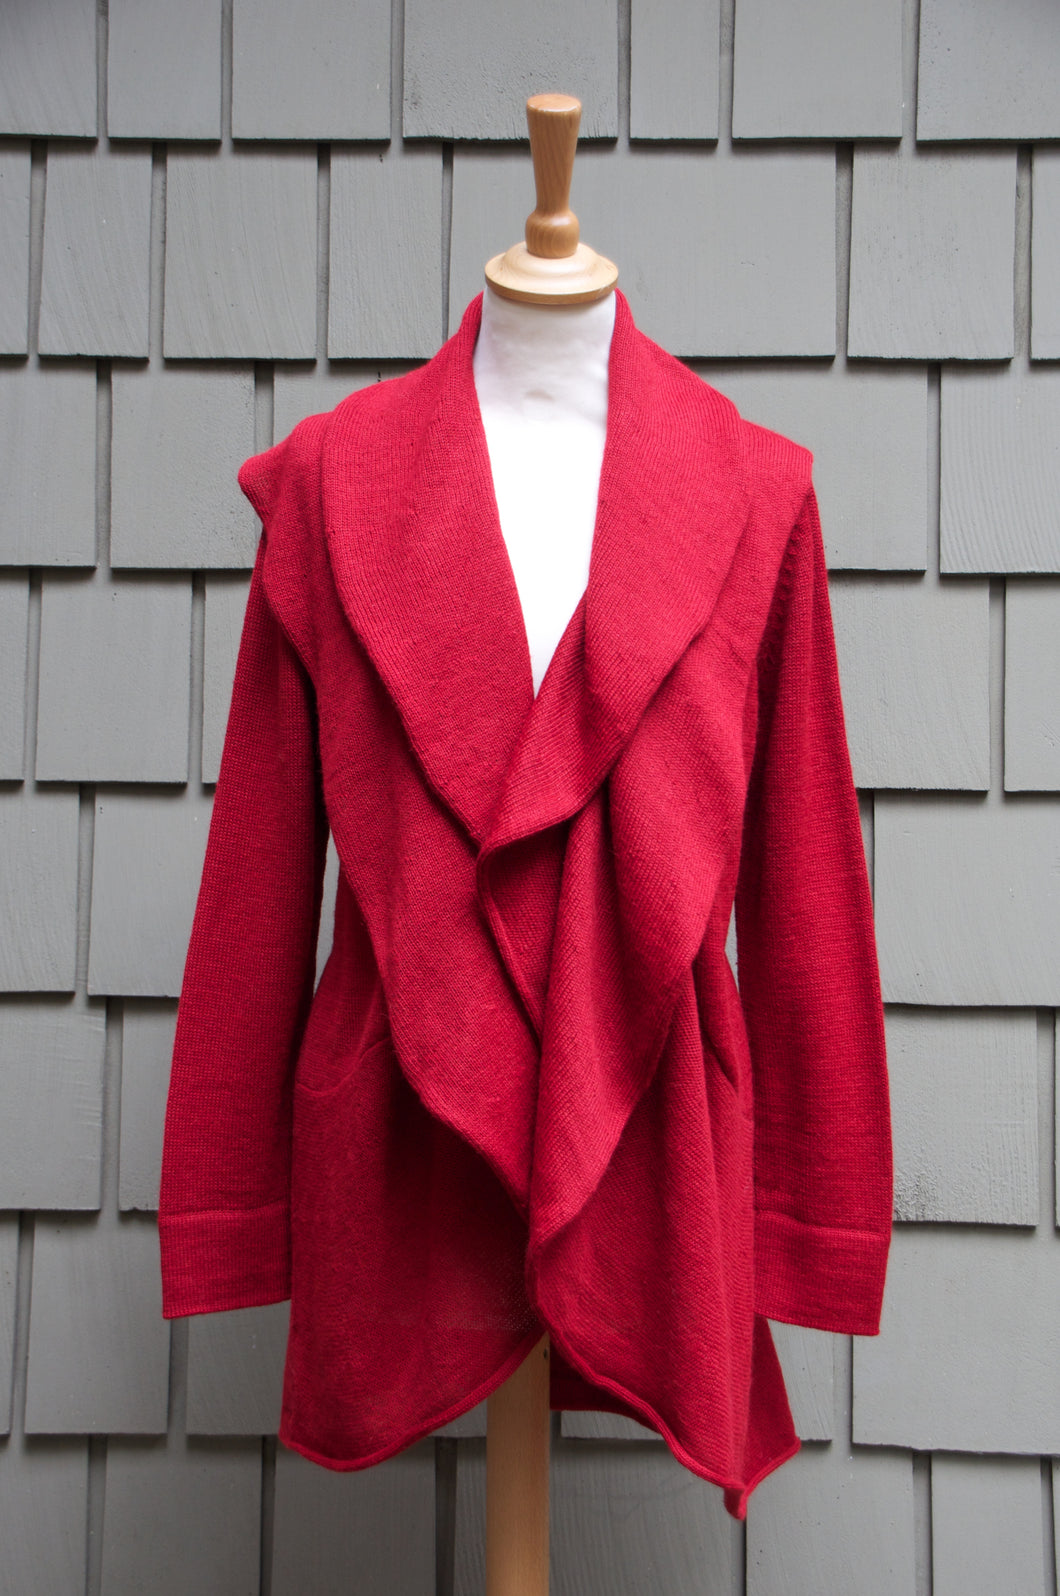 Zolapa Alpaca Cardigan - red color front view 